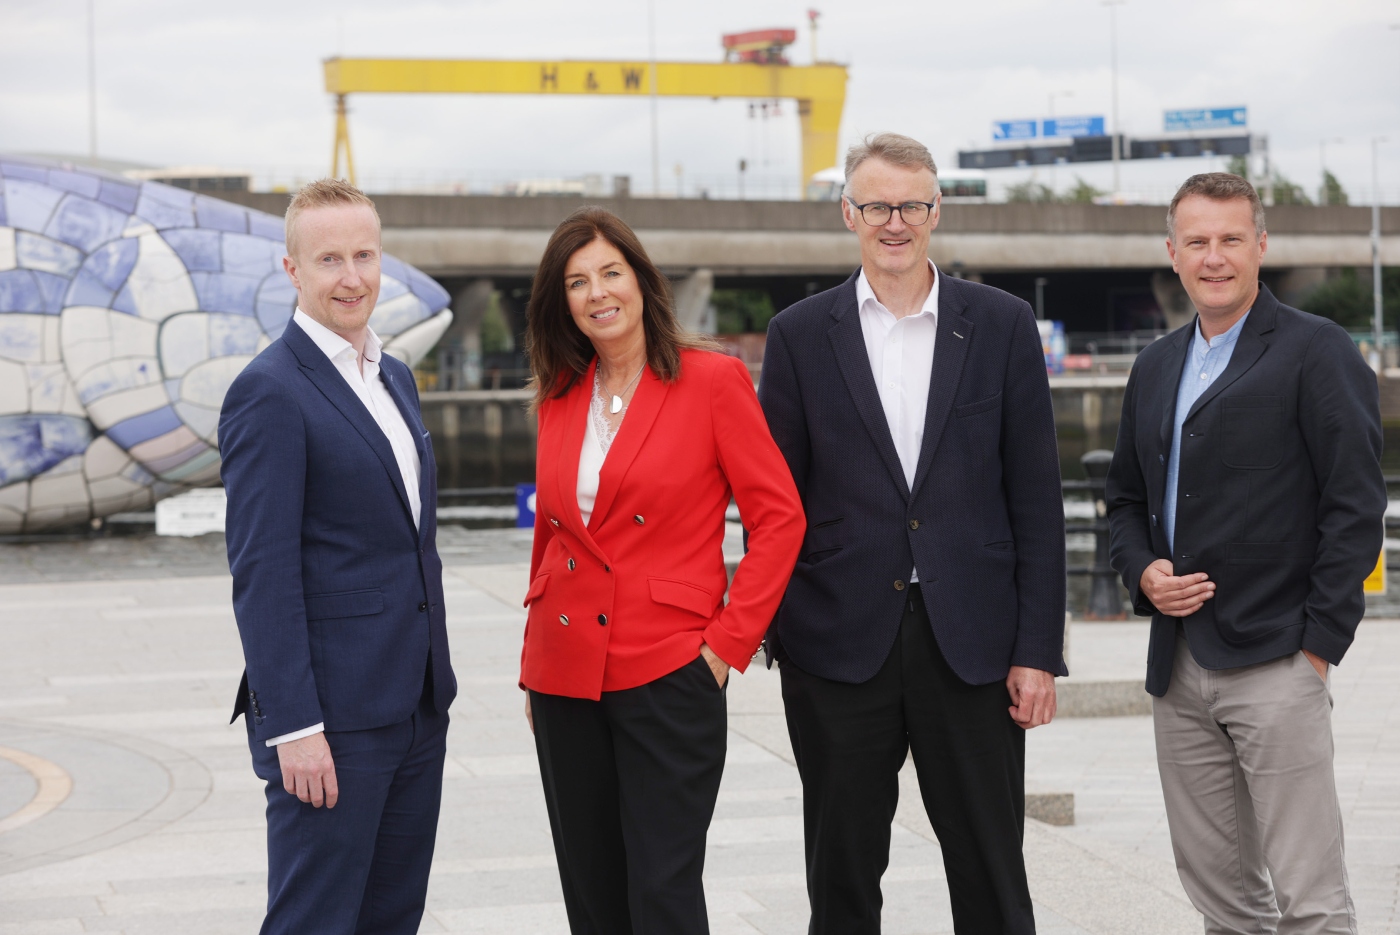 From left Niall Devlin, head of business banking NI at Bank of Ireland, Denise Sidhu, partner, Kernel Capital, William McCulla, Invest NI’s director of corporate finance and Paul Brown, founder and CEO of DisplayNote